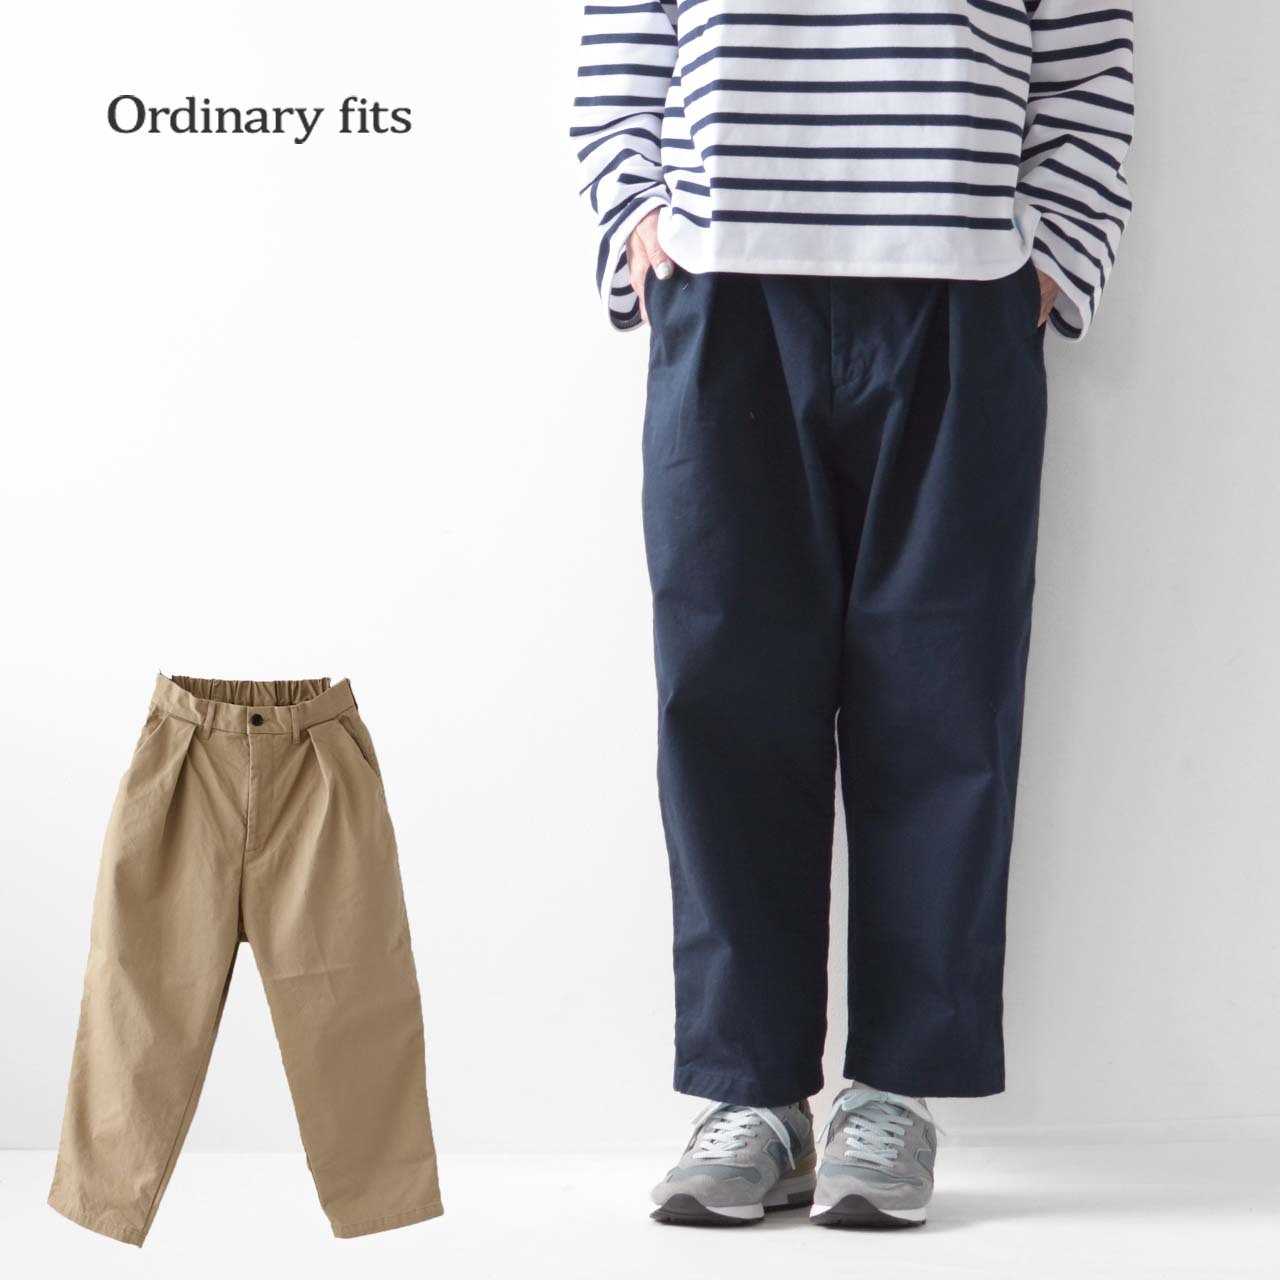 ordinary fits [オーディナリーフィッツ] TONE PANTS(CHINO) [OF-P116]_f0051306_09101260.jpg